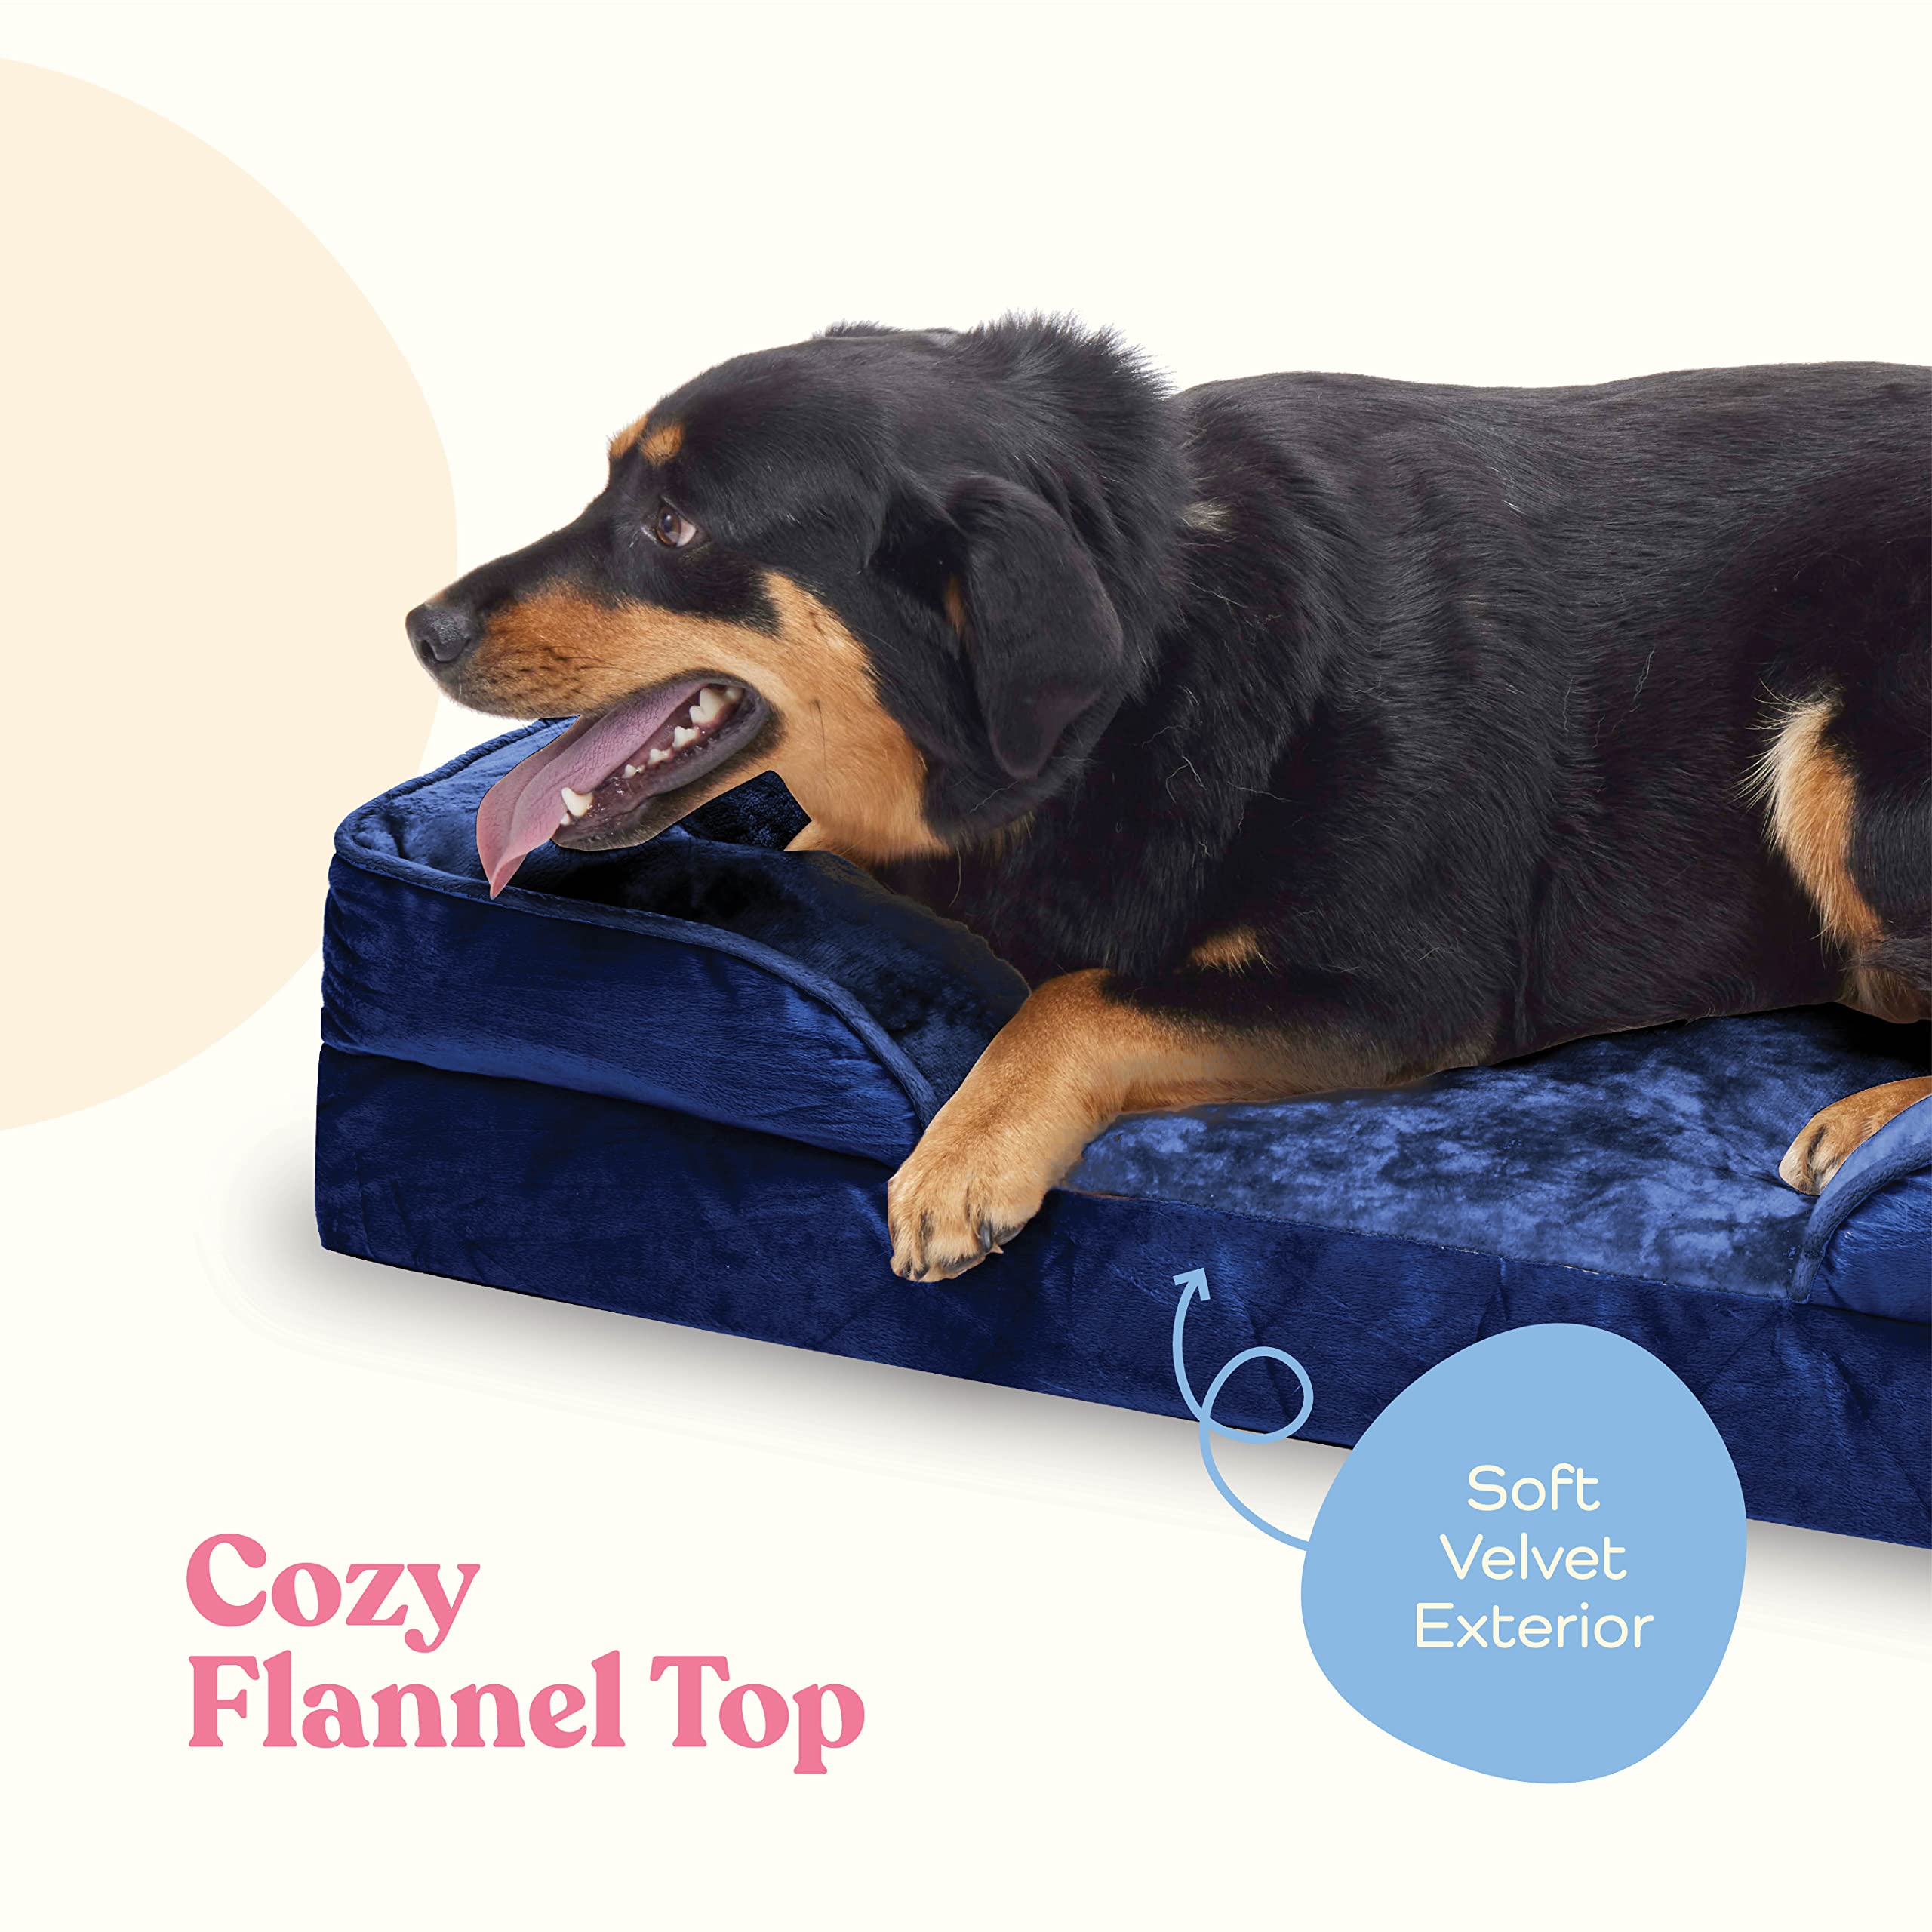 Orthopedic Sofa Dog Bed - Ultra Comfortable Dog Bed for Large Dogs - Breathable & Waterproof Pet Bed- Egg Foam Sofa Bed with Extra Head and Neck Support -  - Like New